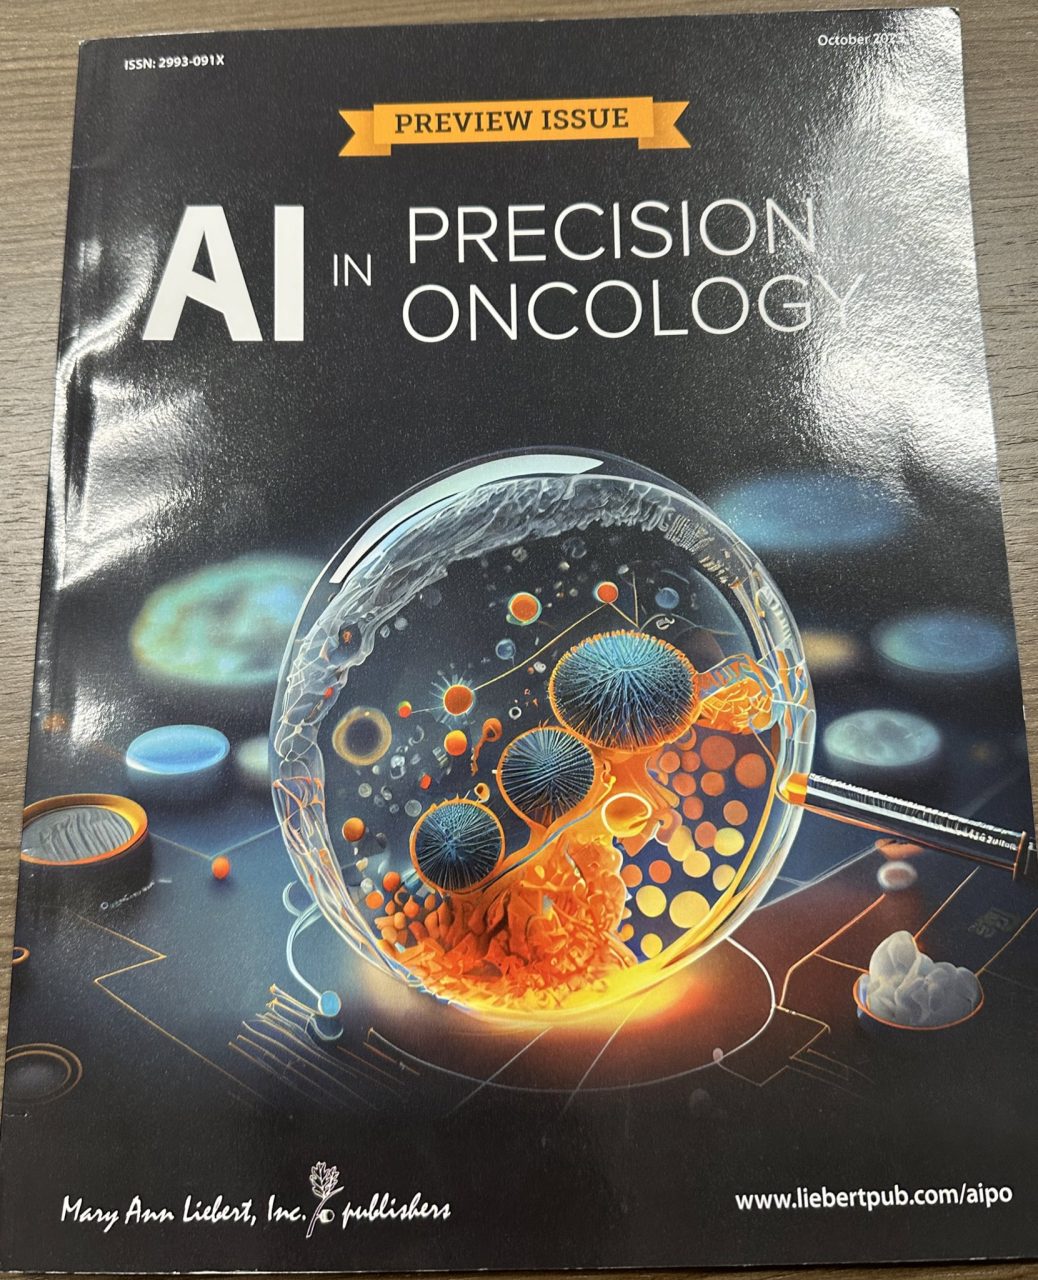 Vivek Subbiah: Forward-thinking journal on AI in Oncology and precision medicine